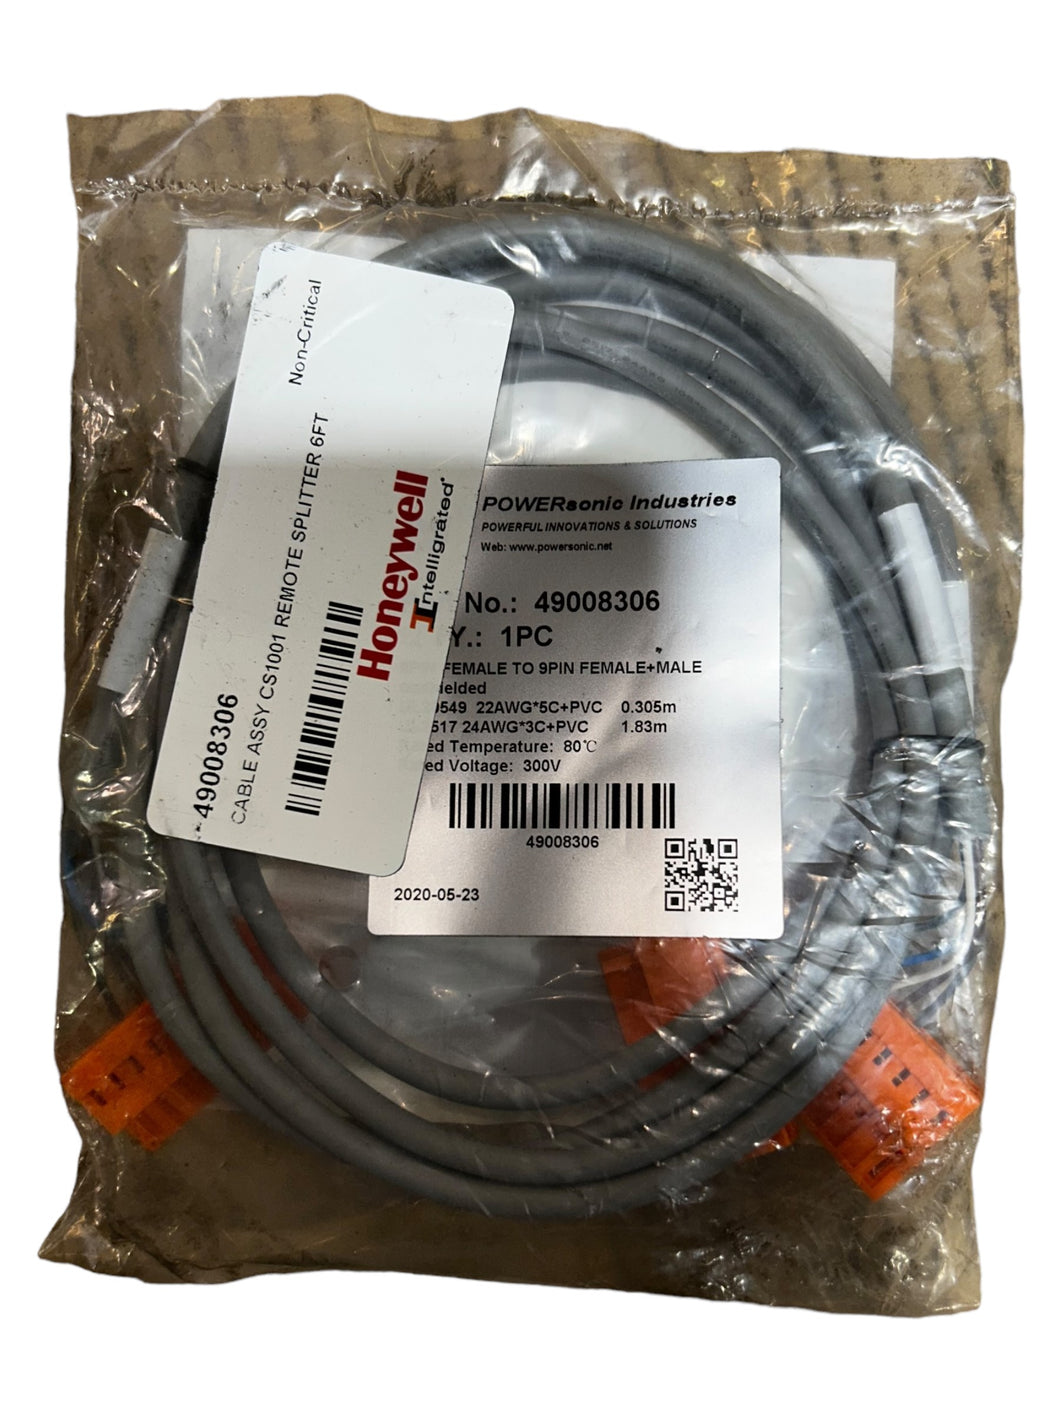 PowerSonic Cordset 49008306 9PIN Female To 9PIN Female+Male Unshielded - NEW IN ORIGINAL PACKAGING - FreemanLiquidators - [product_description]